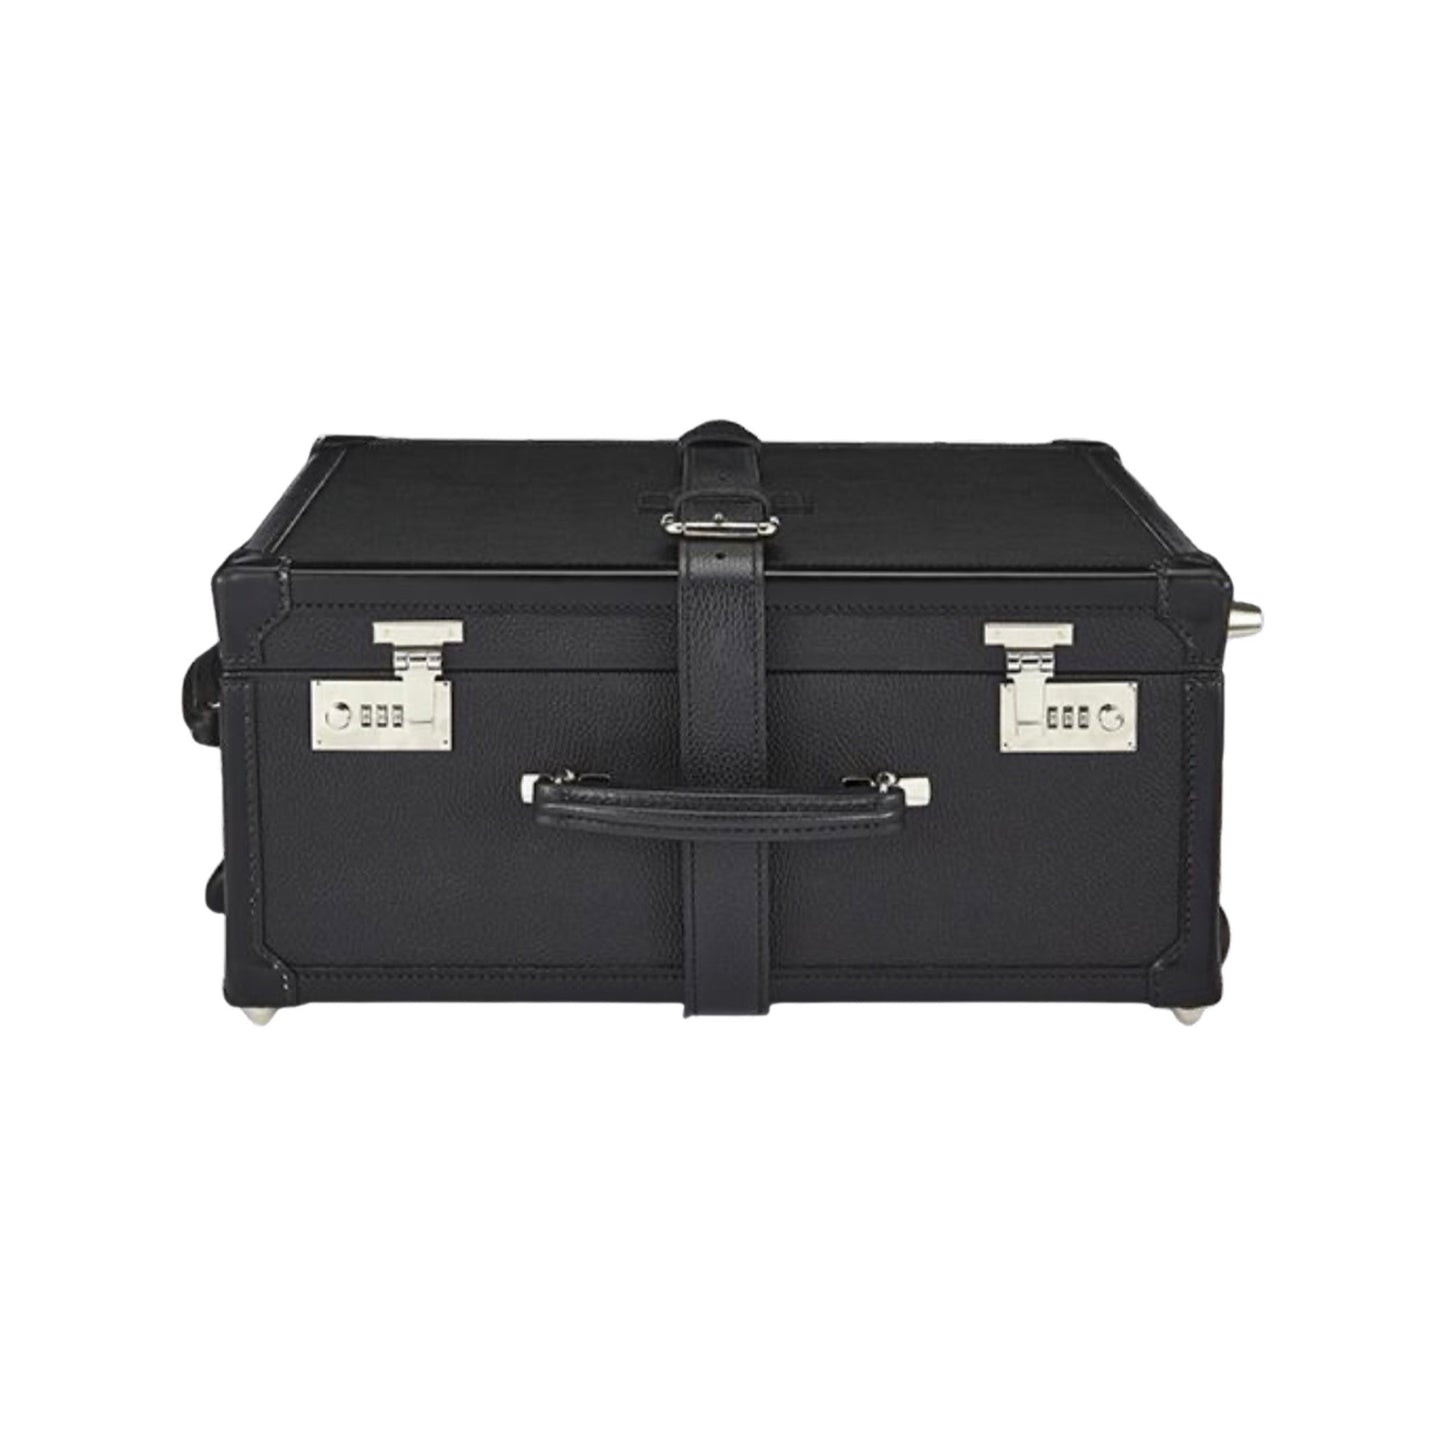 Custom Leather trunk suitcase Luggage on Wheels | 18 Inch Suitcase | Leather on Wheels | Made in UK | Superior Quality | Wheels and Trolley | Hand Stitched | Simpson